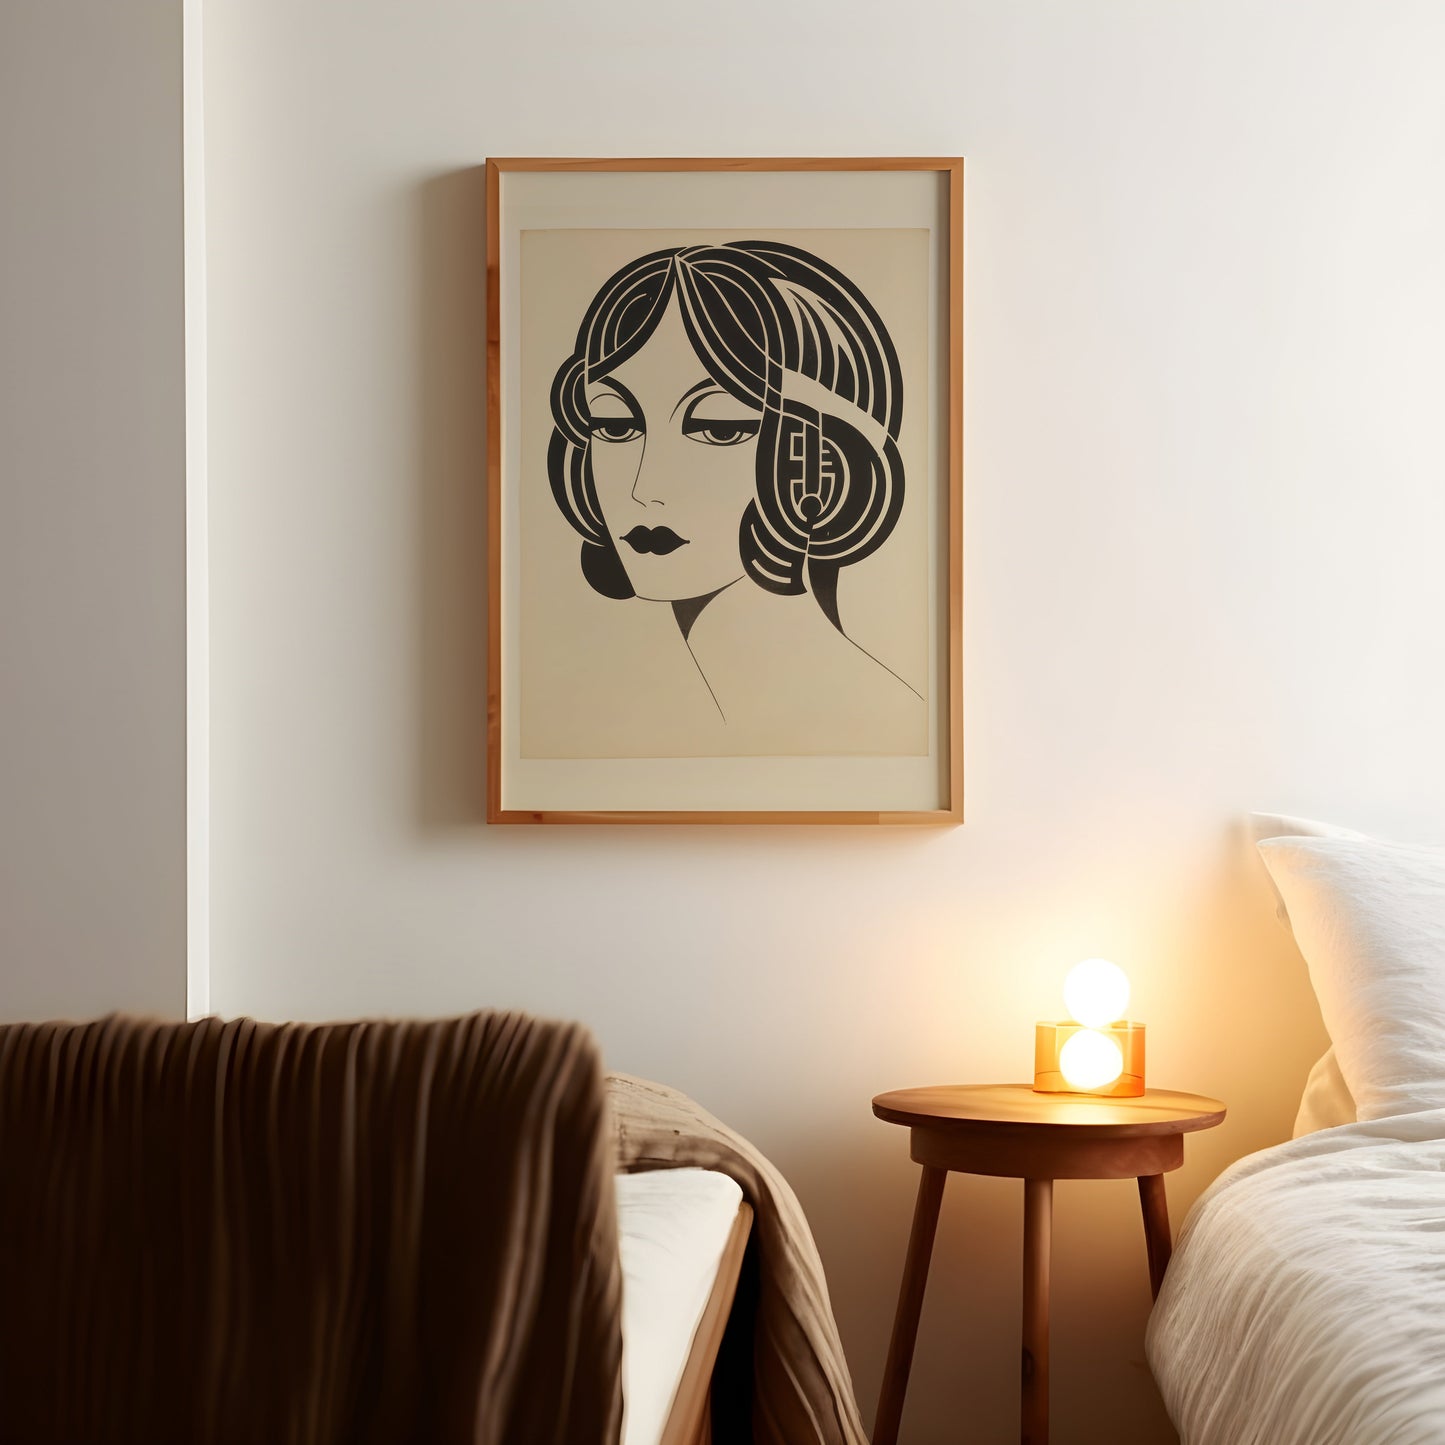 a picture of a woman's face on a wall above a bed